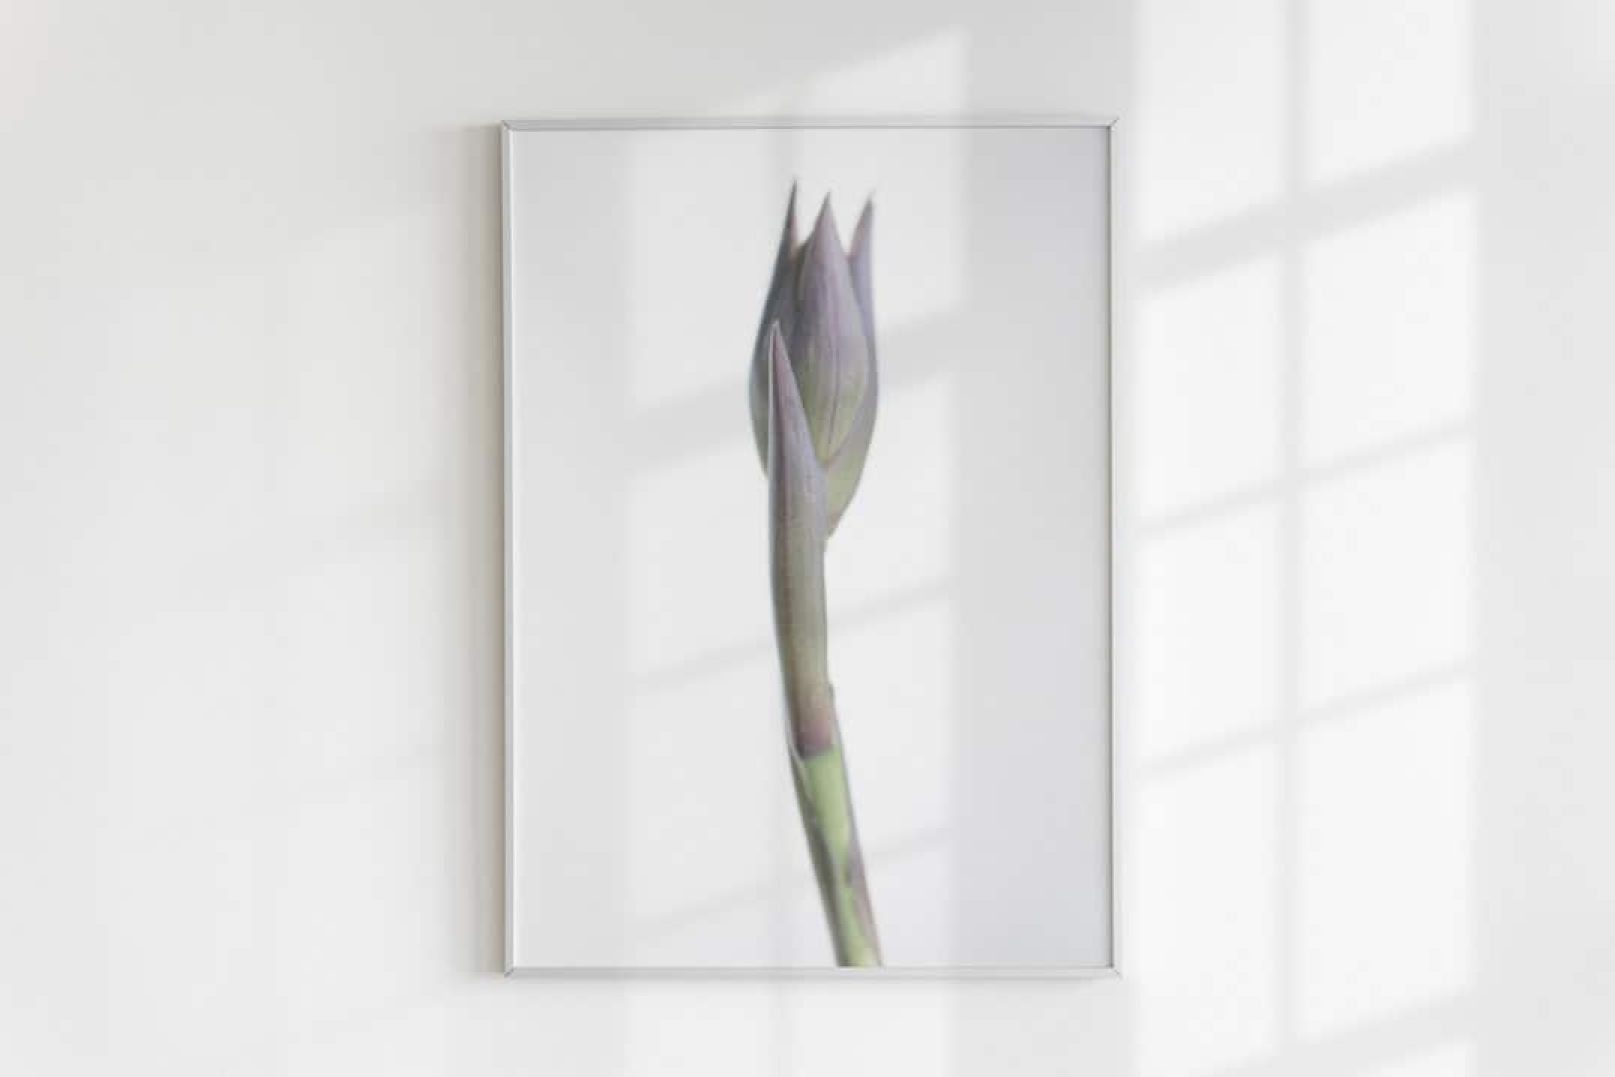 Luxury picture frame  with hosta bud as motif,on the wall